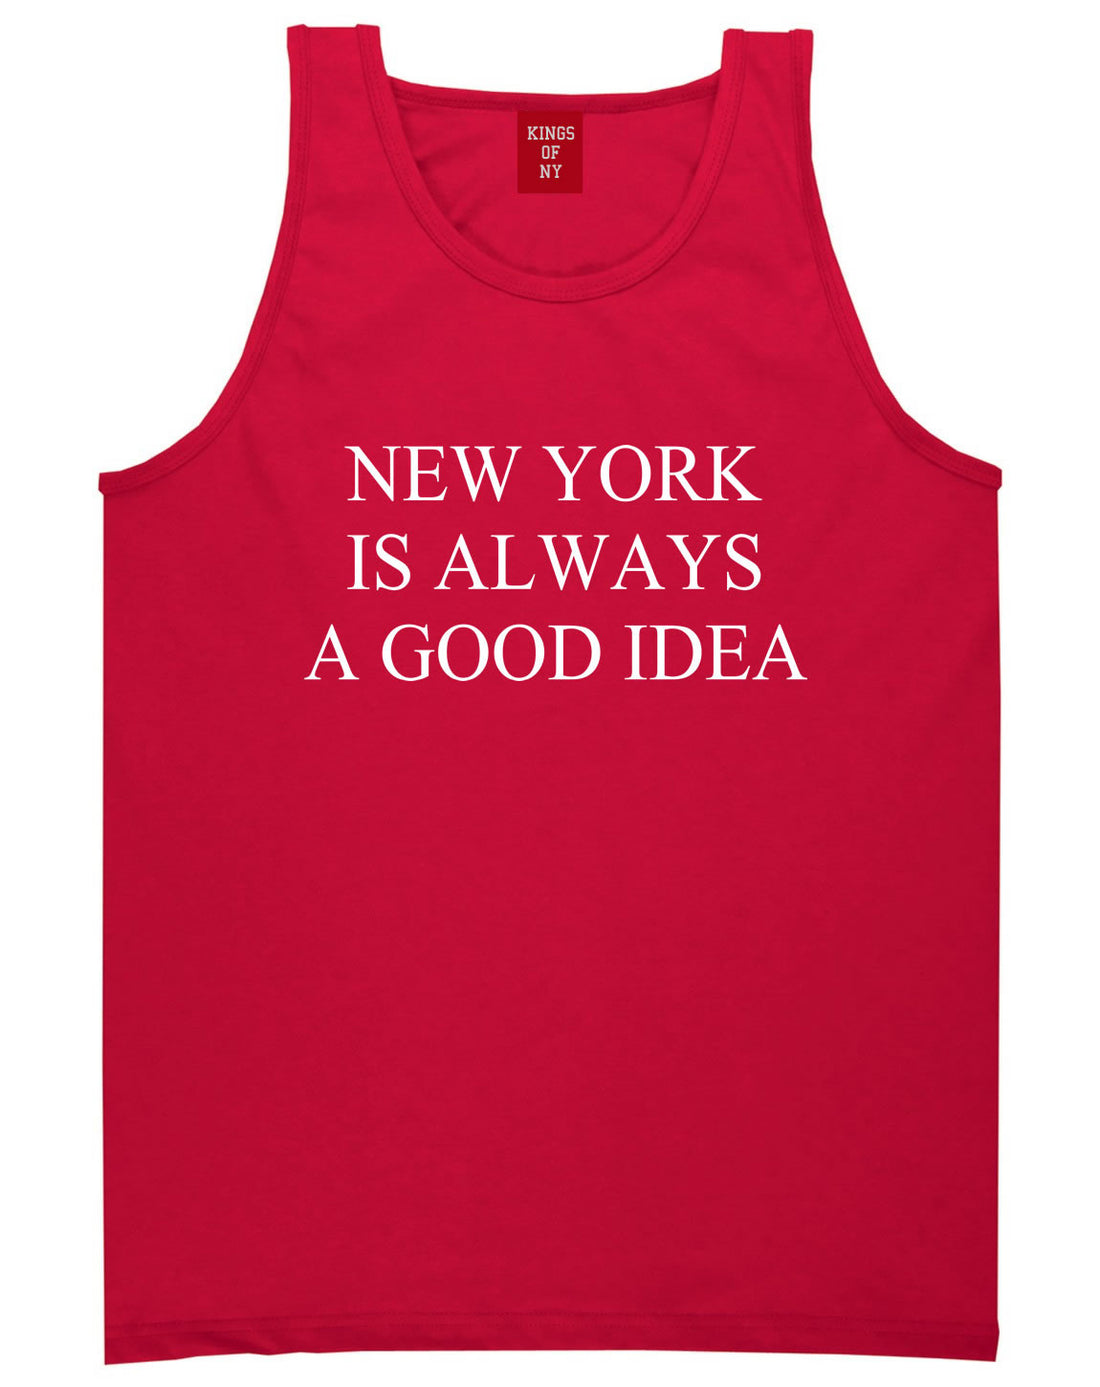 New York Is Always A Good Idea Tank Top in Red by Kings Of NY